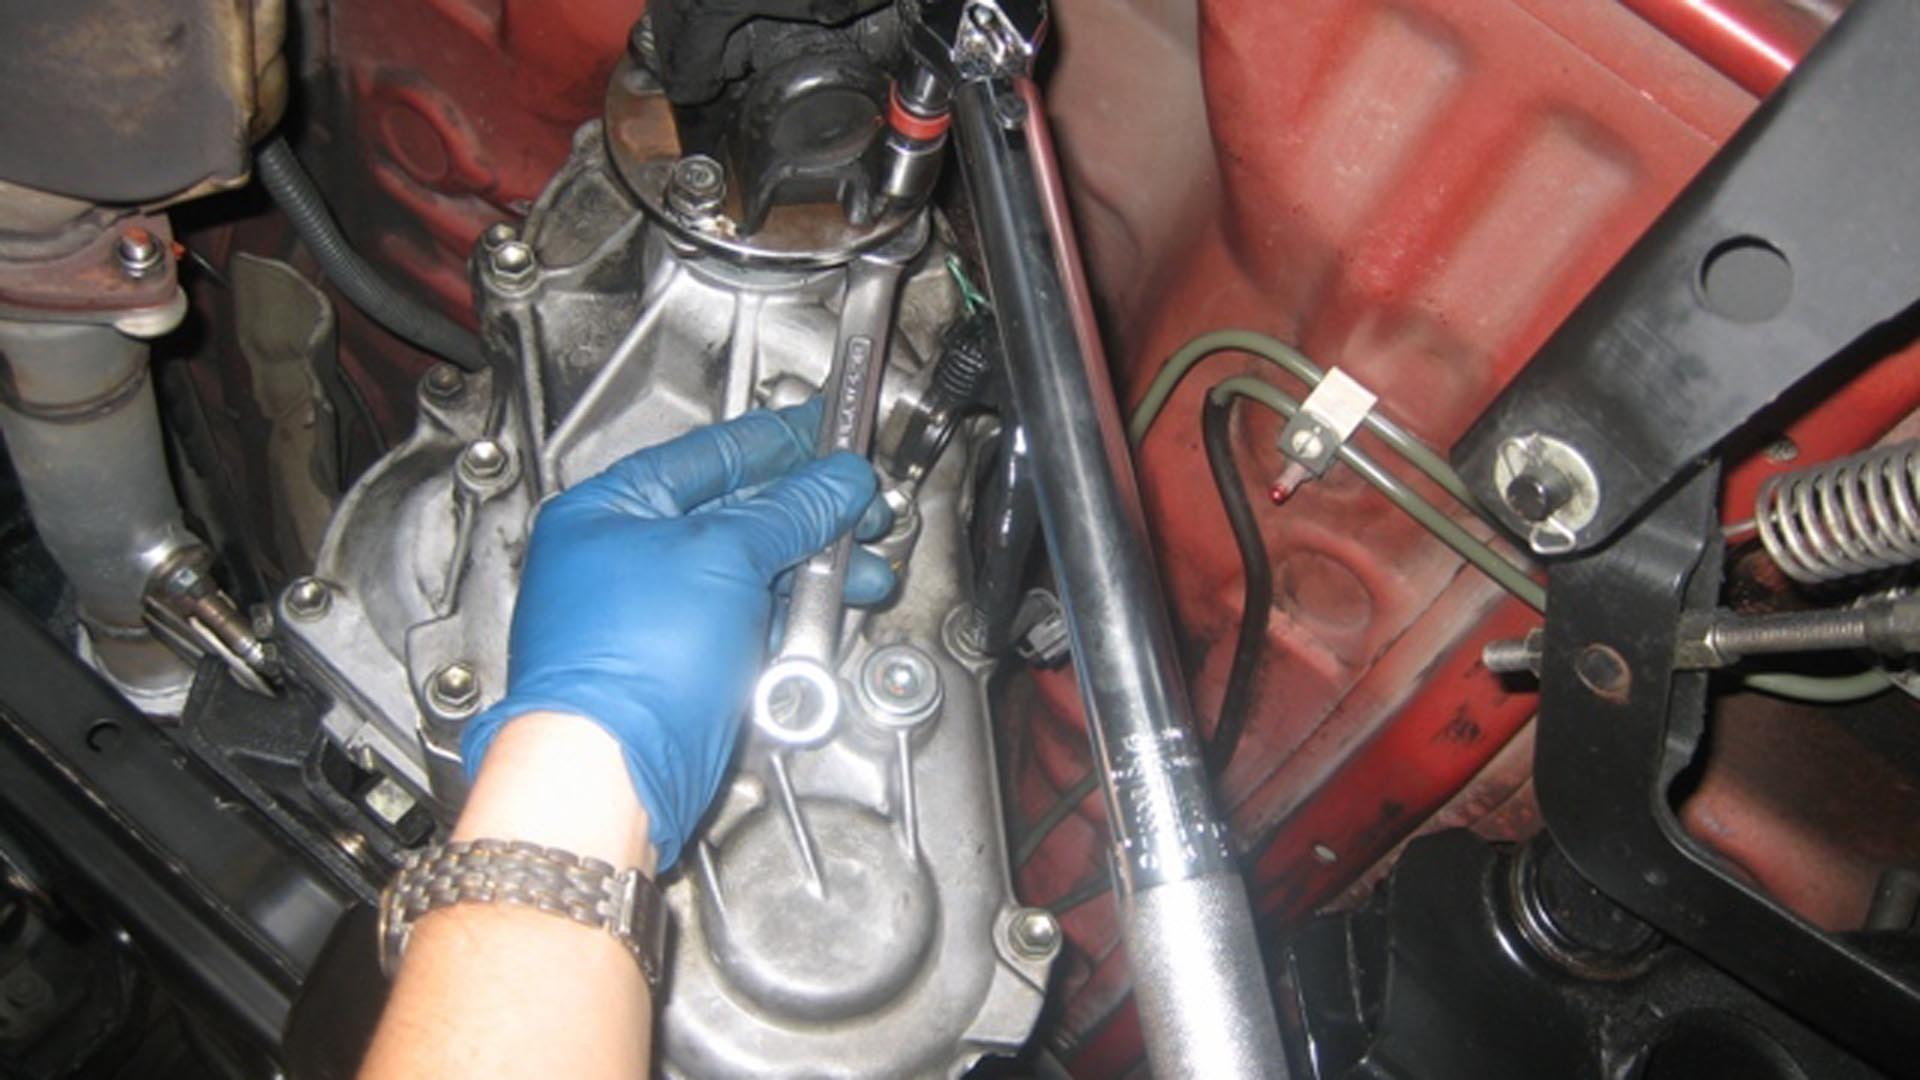 Toyota Tundra 2000-Present: How to Change Transfer Case Fluid | Yotatech